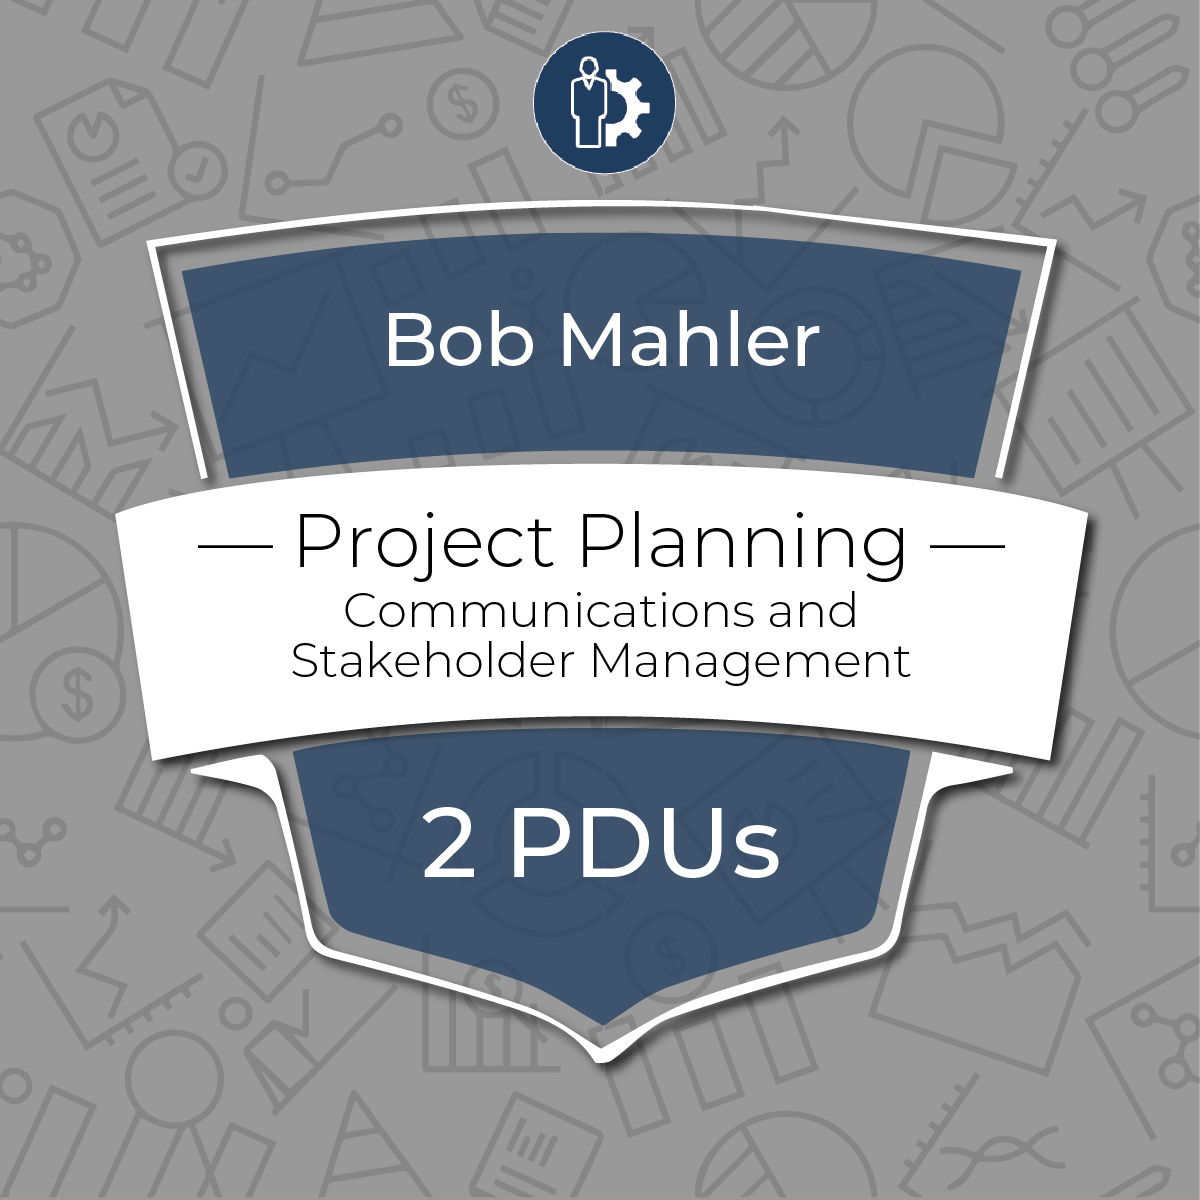 Project Planning - Communications and Stakeholder Management